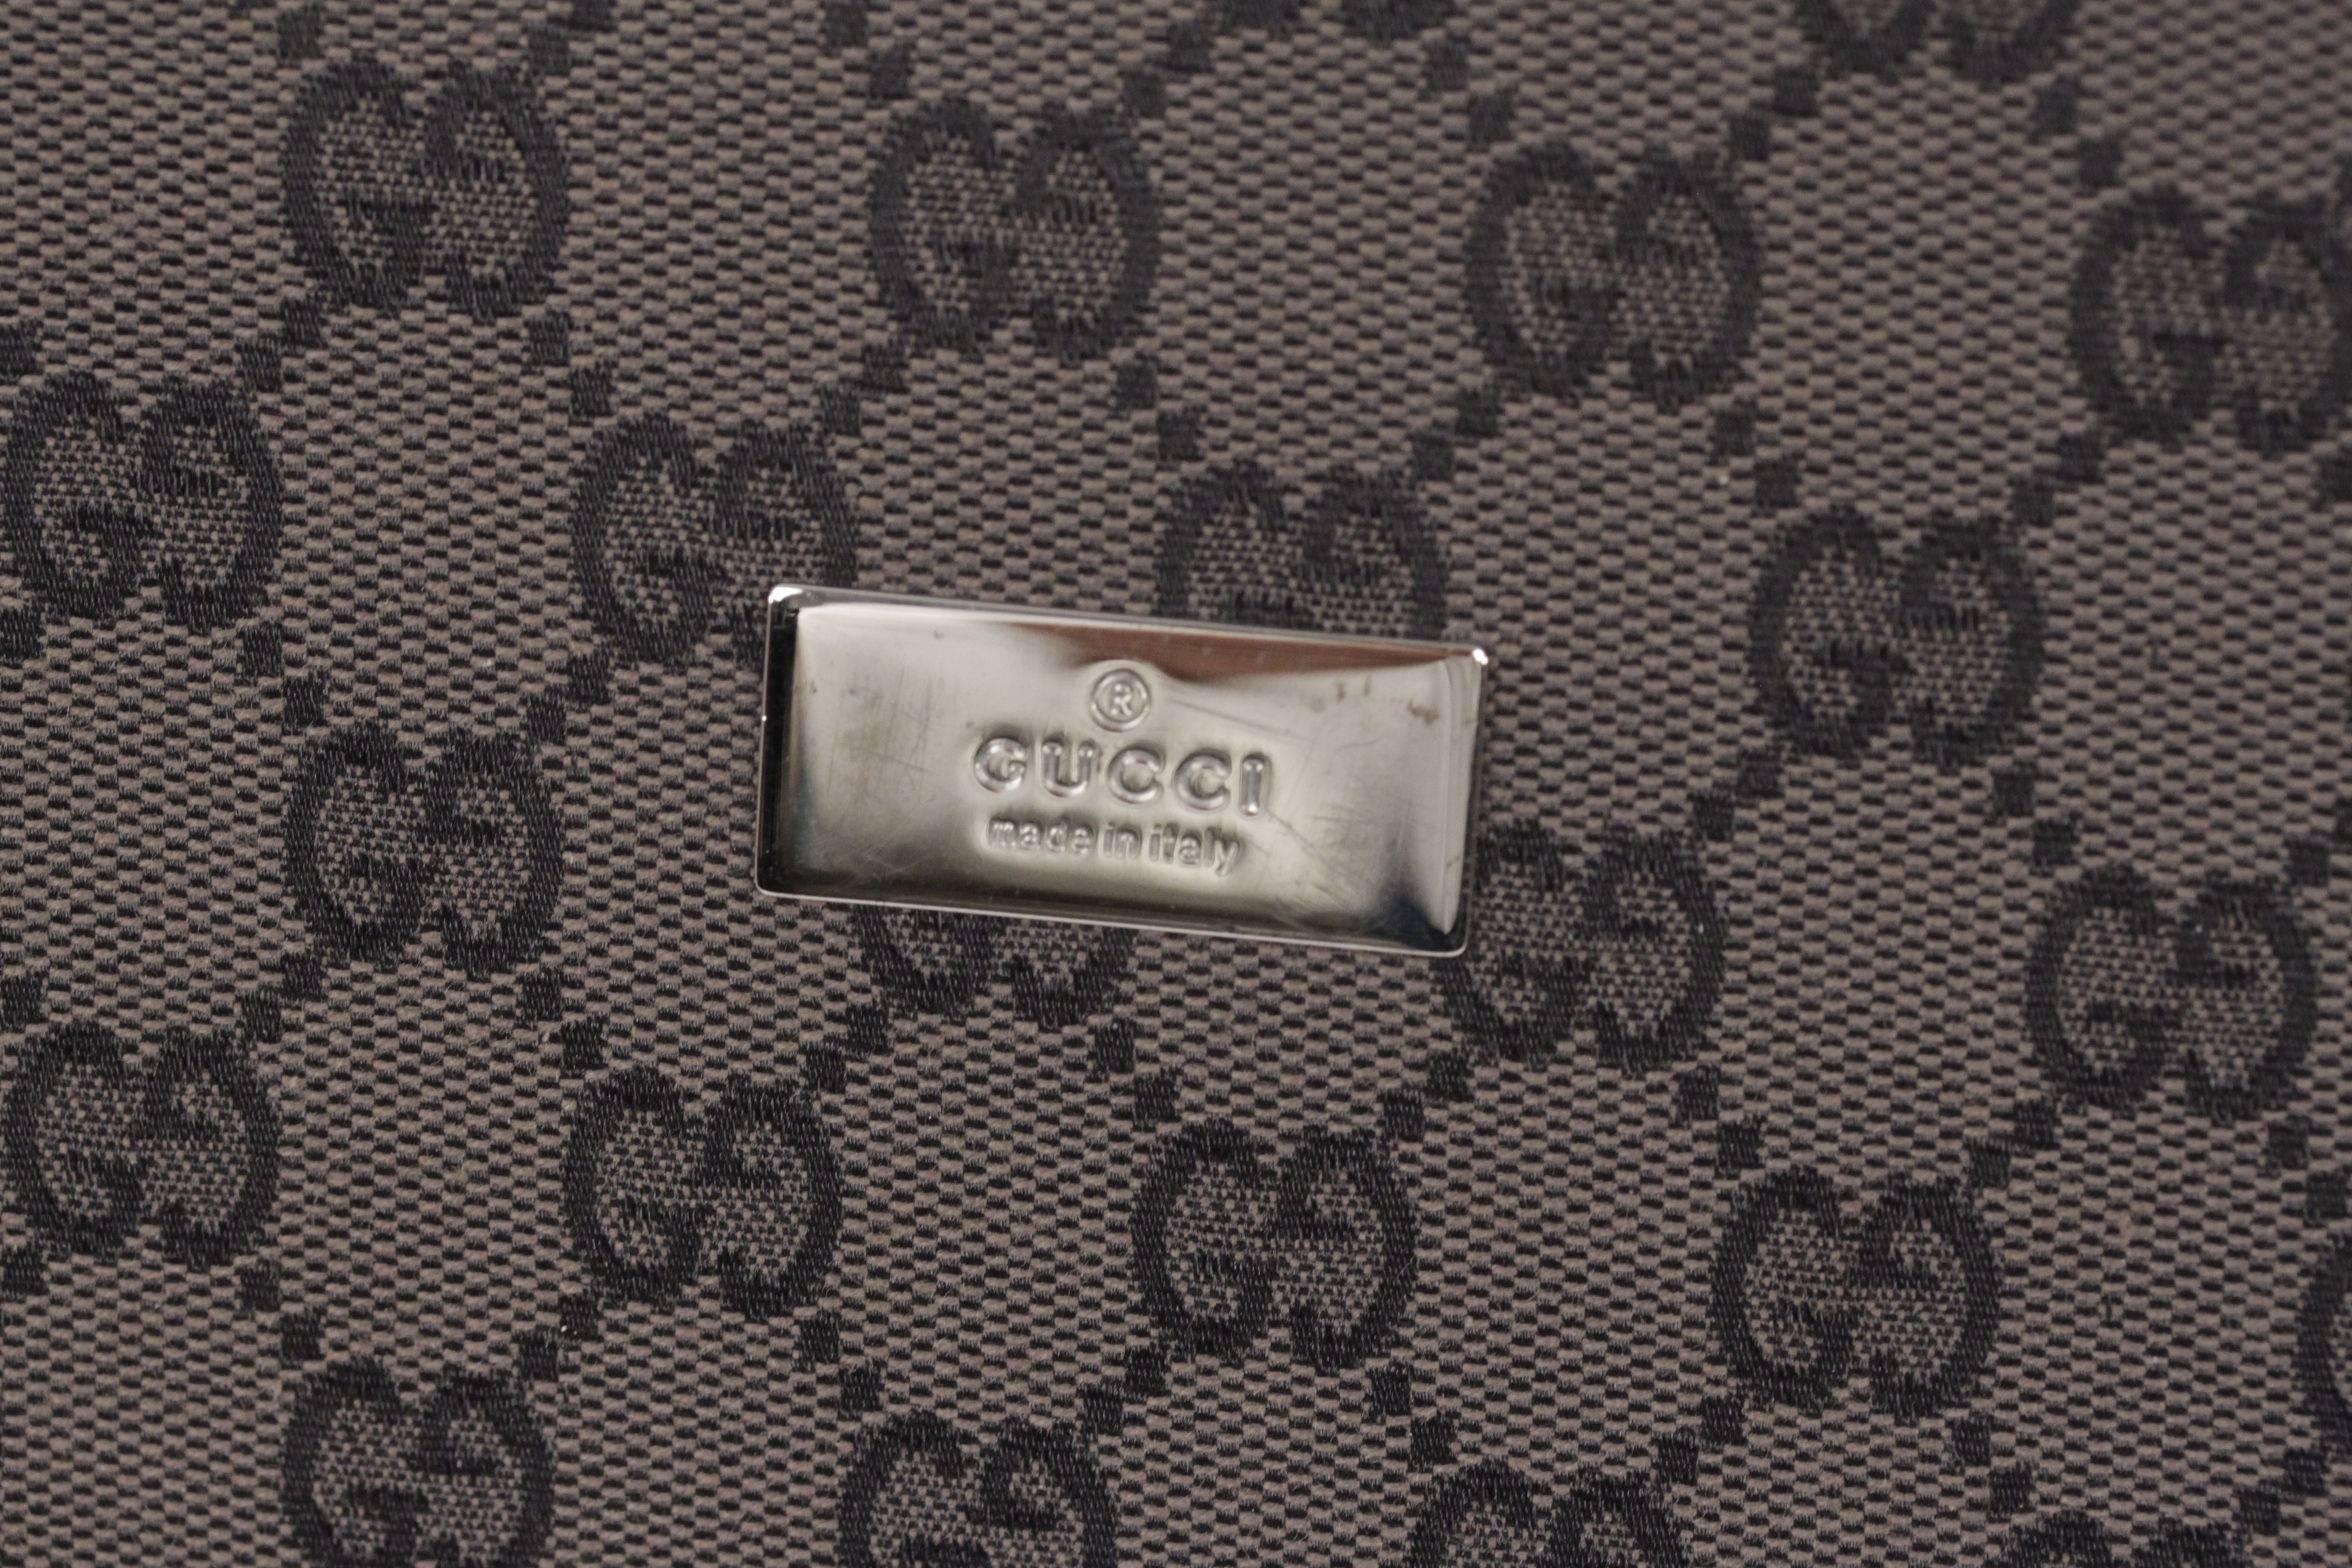 Brand: GUCCI - Made in Italy

Logos / Tags: 'GUCCI Made in Italy' silver metal tag on the front, GG - GUCCI monograms on canvas, 'GUCCI - Made in Italy' tag (with serial number on its reverse), signed hardware

Condition rate & details (please